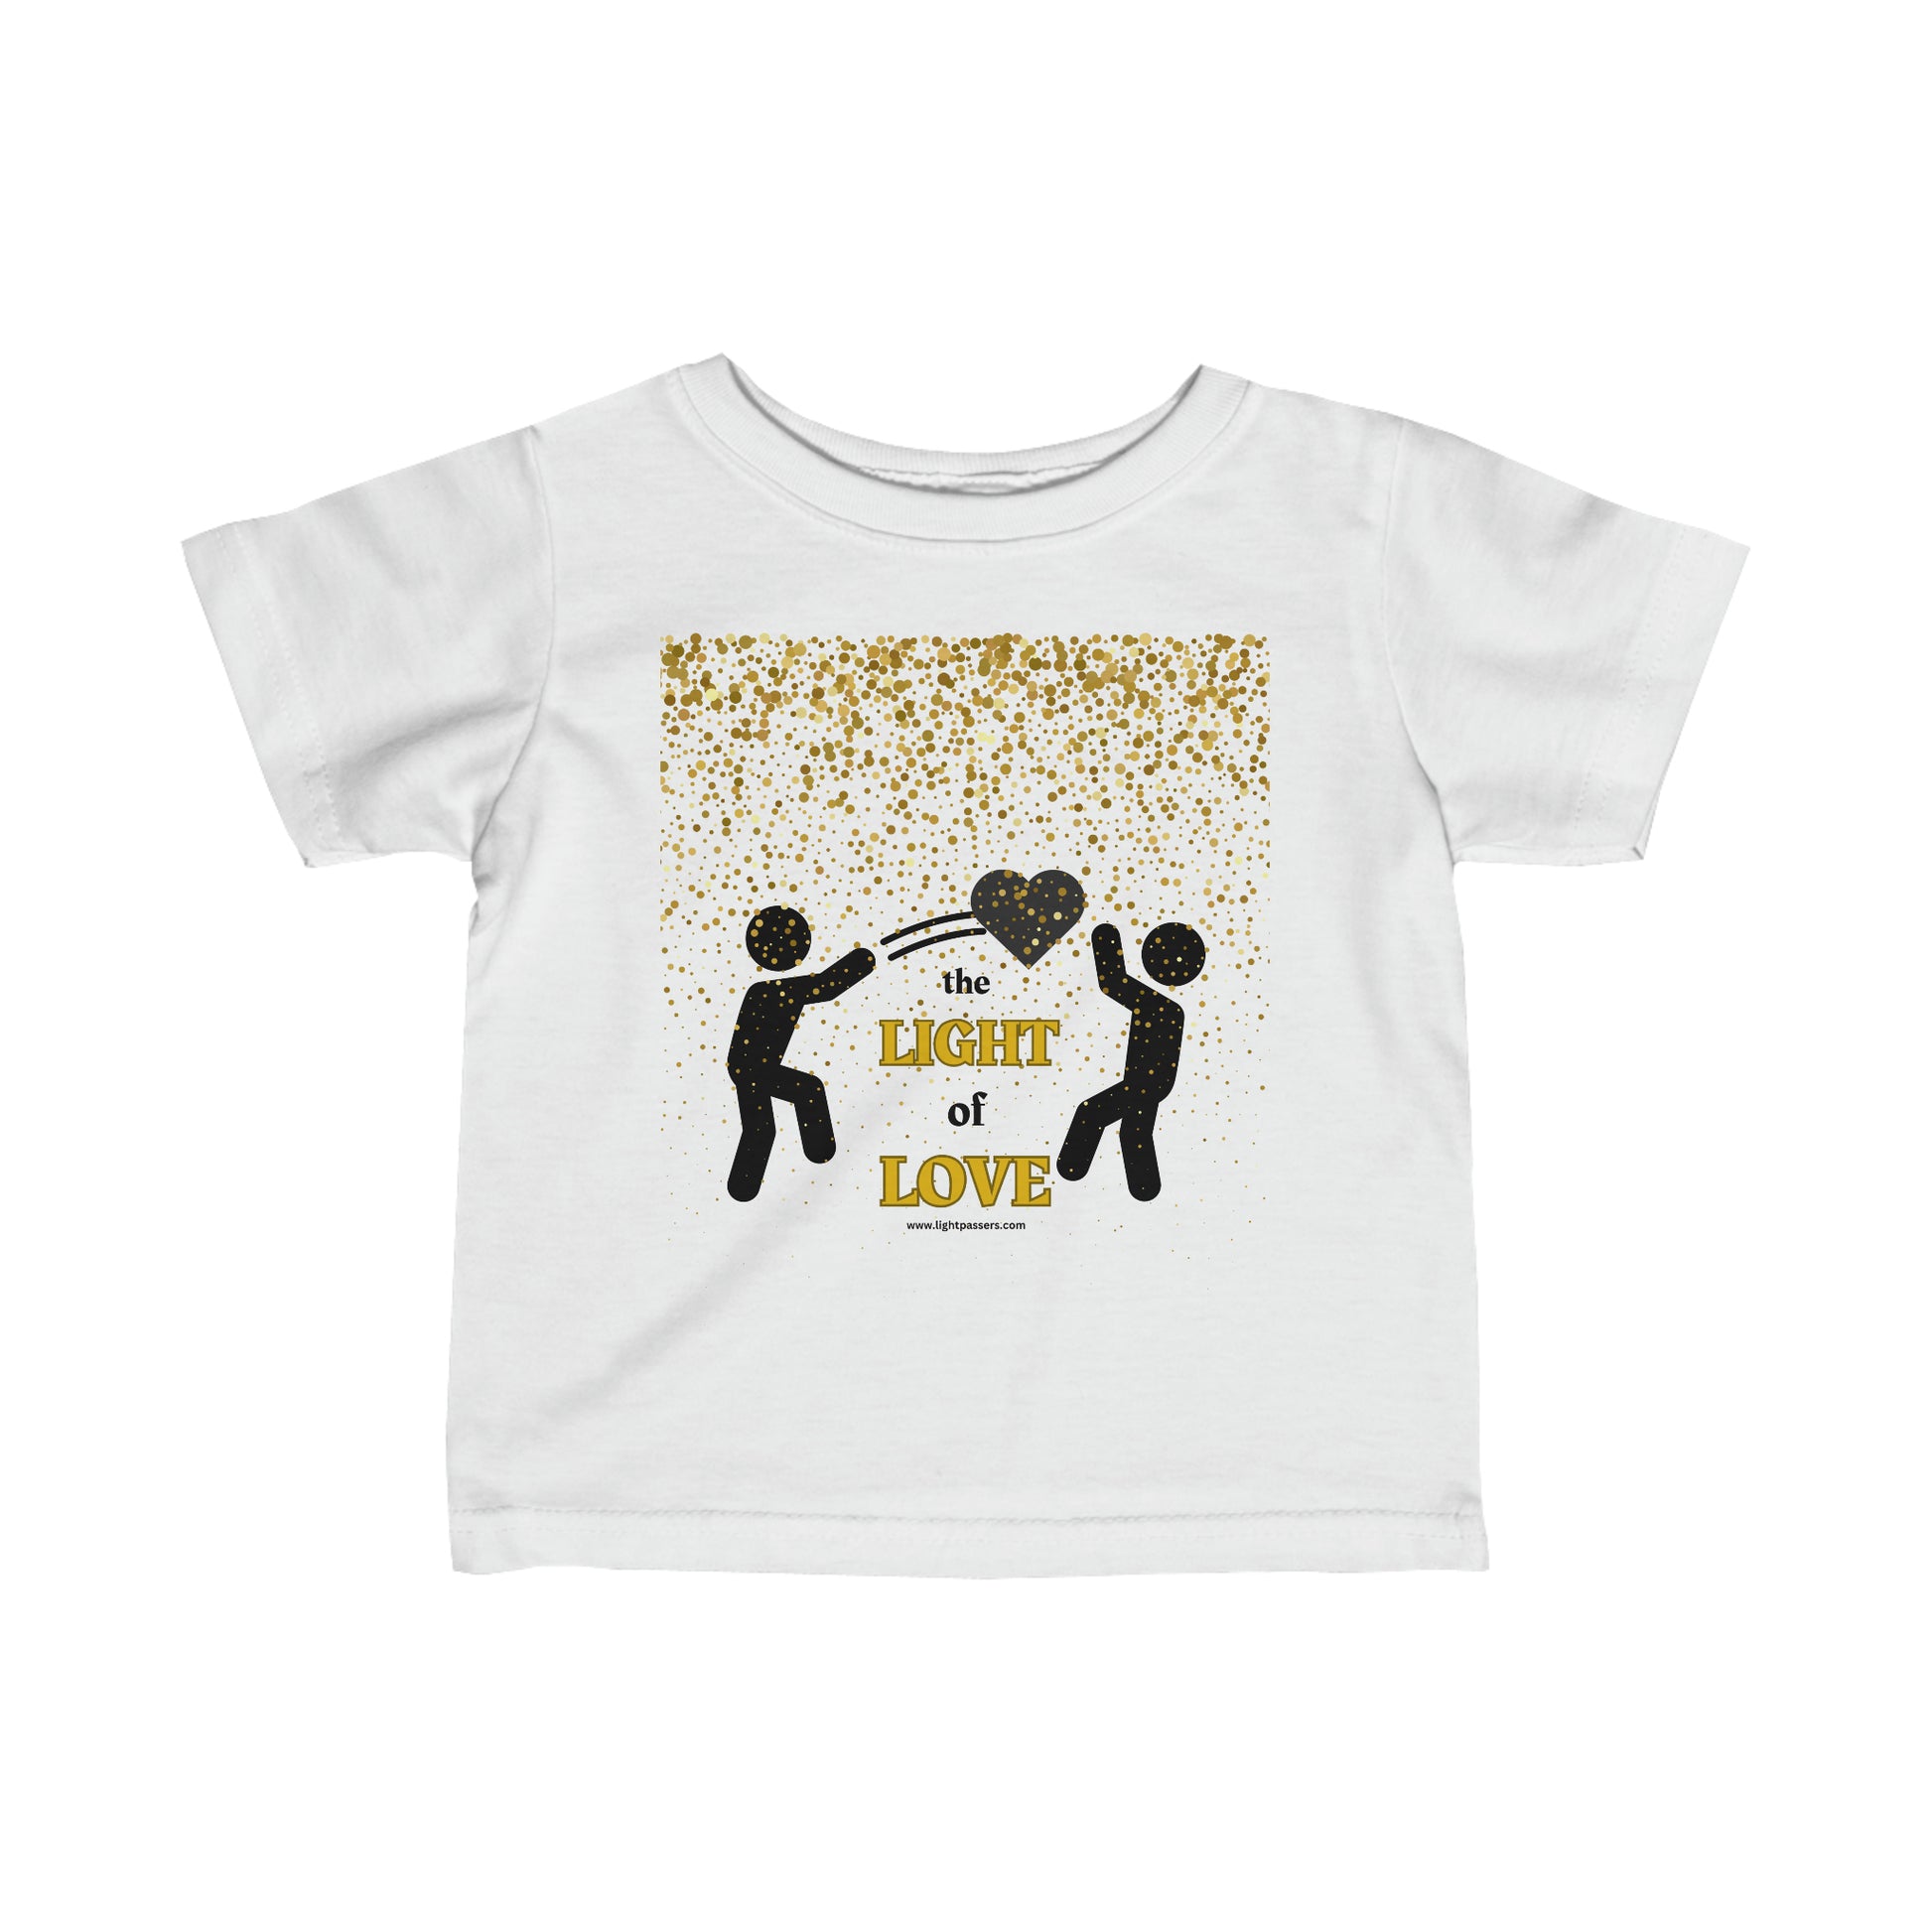 A white infant tee with gold and black graphics, featuring a heart and text design. Side seams, ribbed knitting, and taped shoulders for durability and comfort. Made of 100% combed ringspun cotton.